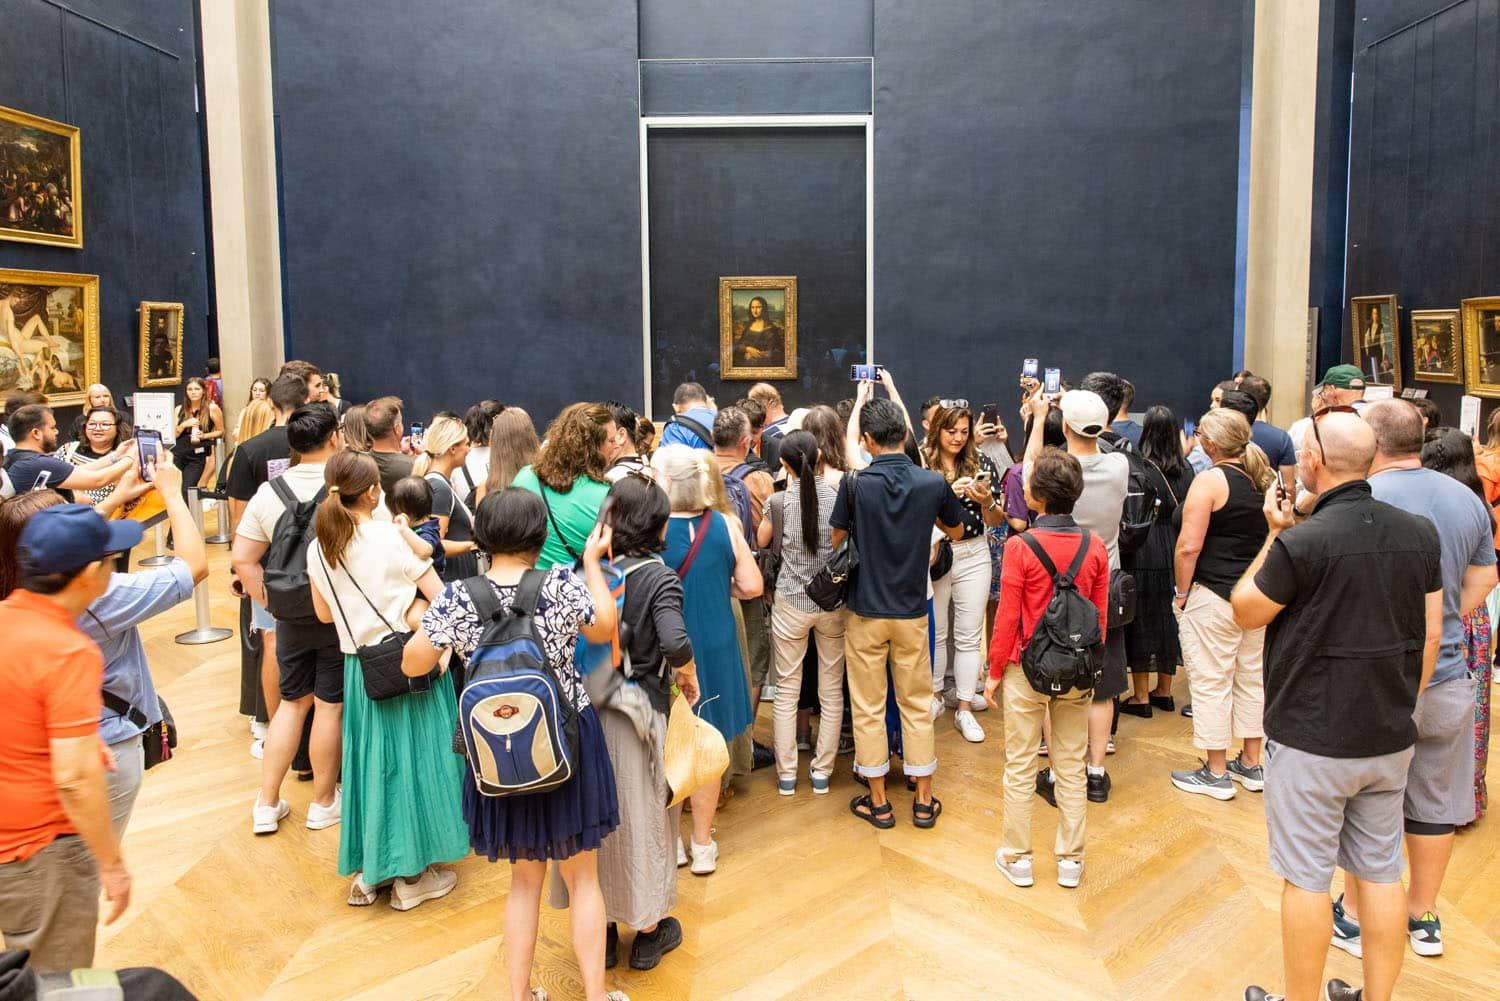 Mona Lisa Louvre | How to visit the Louvre